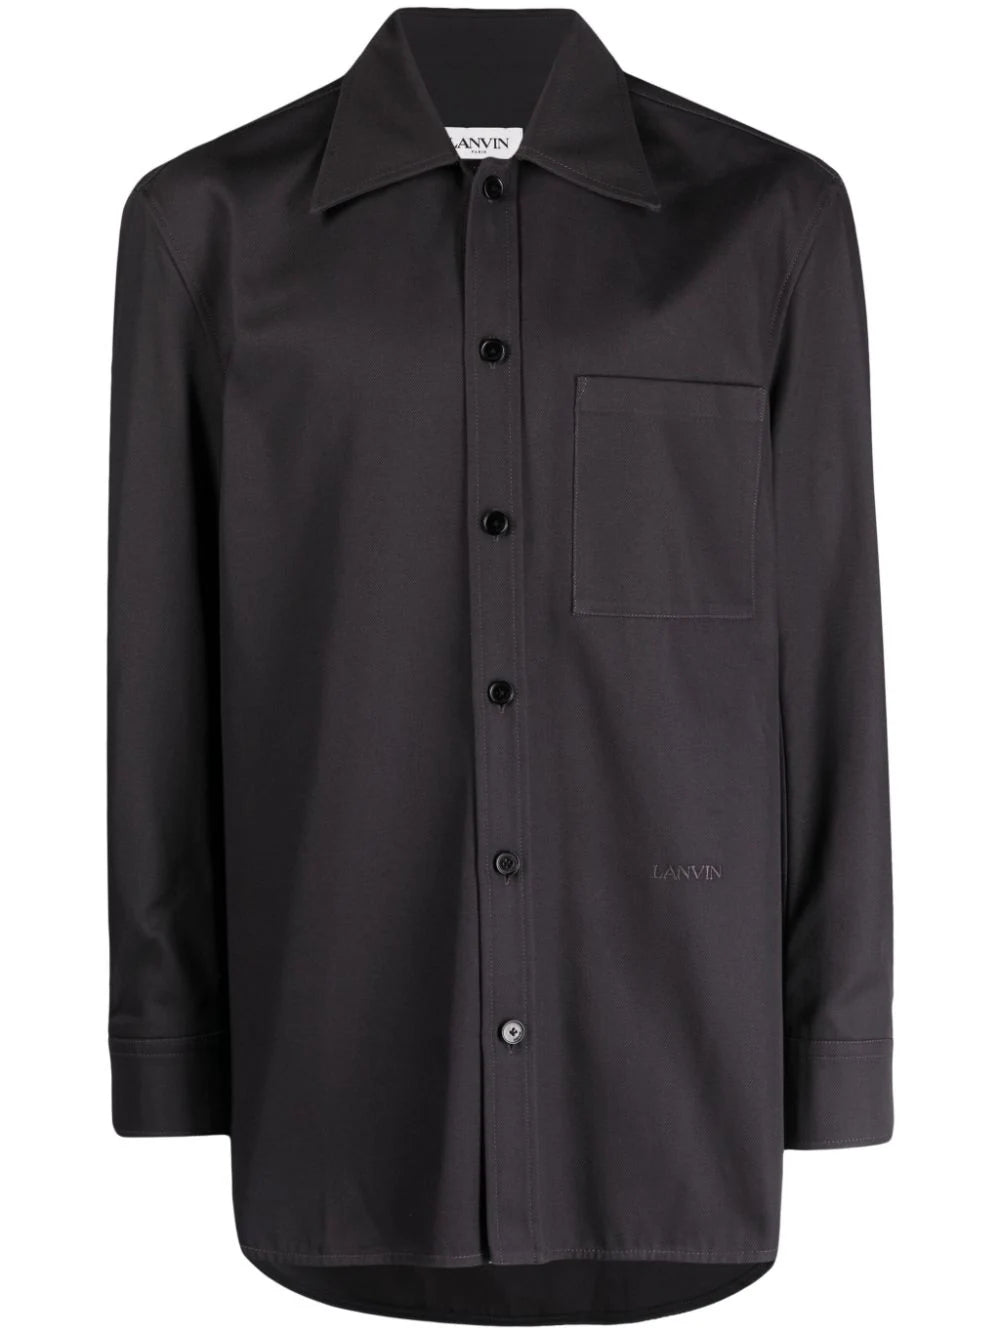 TWISTED COCOON OVERSHIRT - SHEET-1